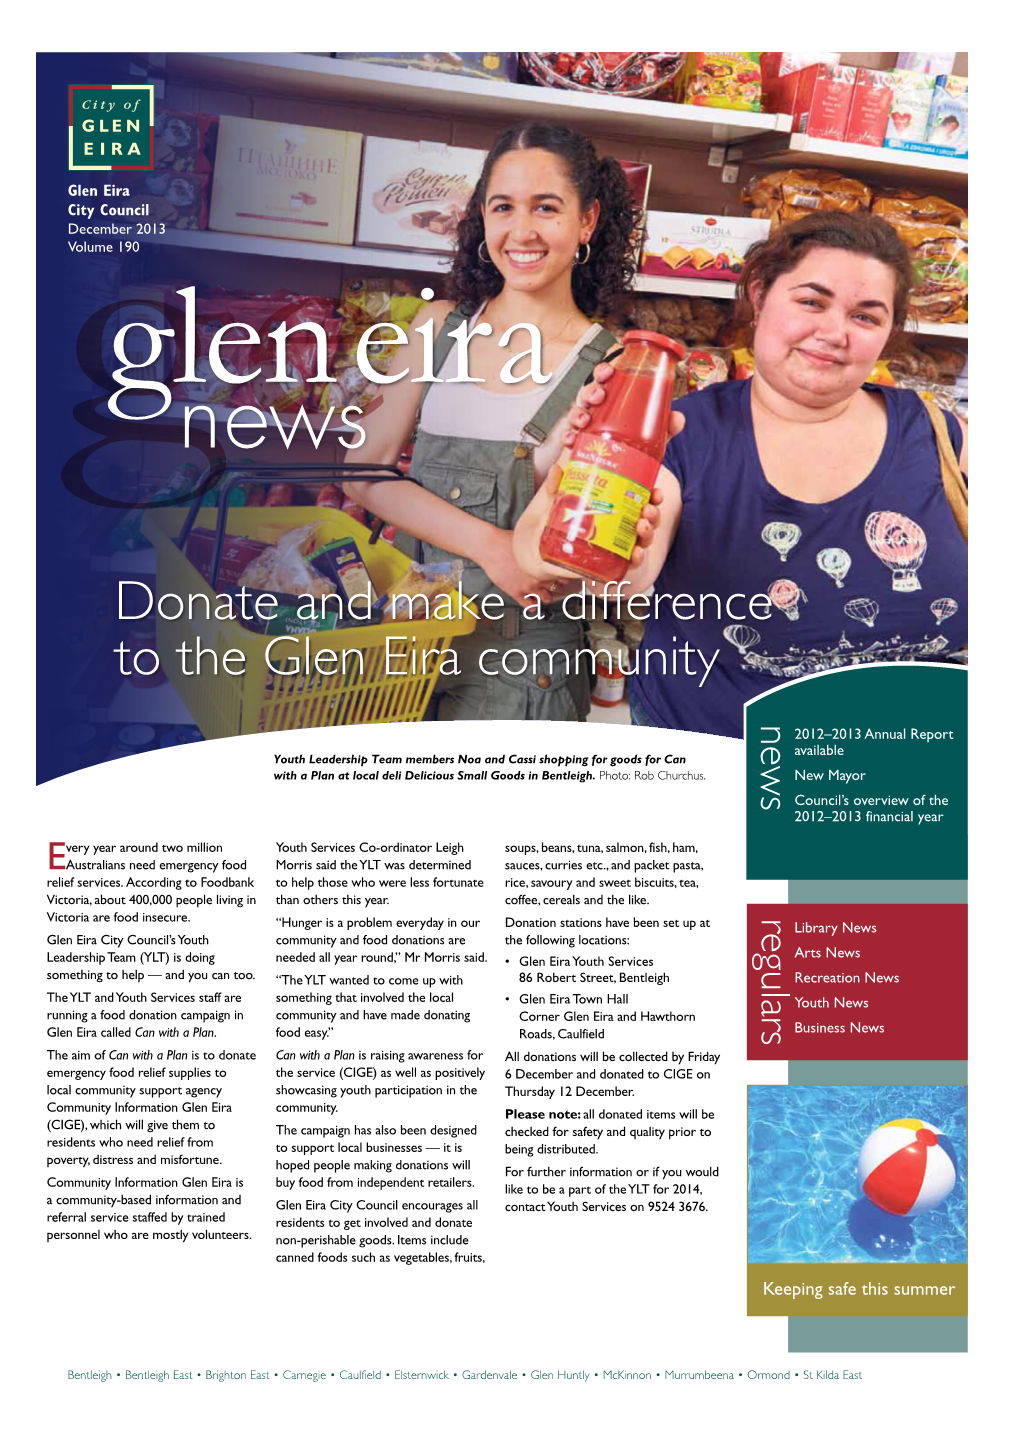 Donate and Make a Difference to the Glen Eira